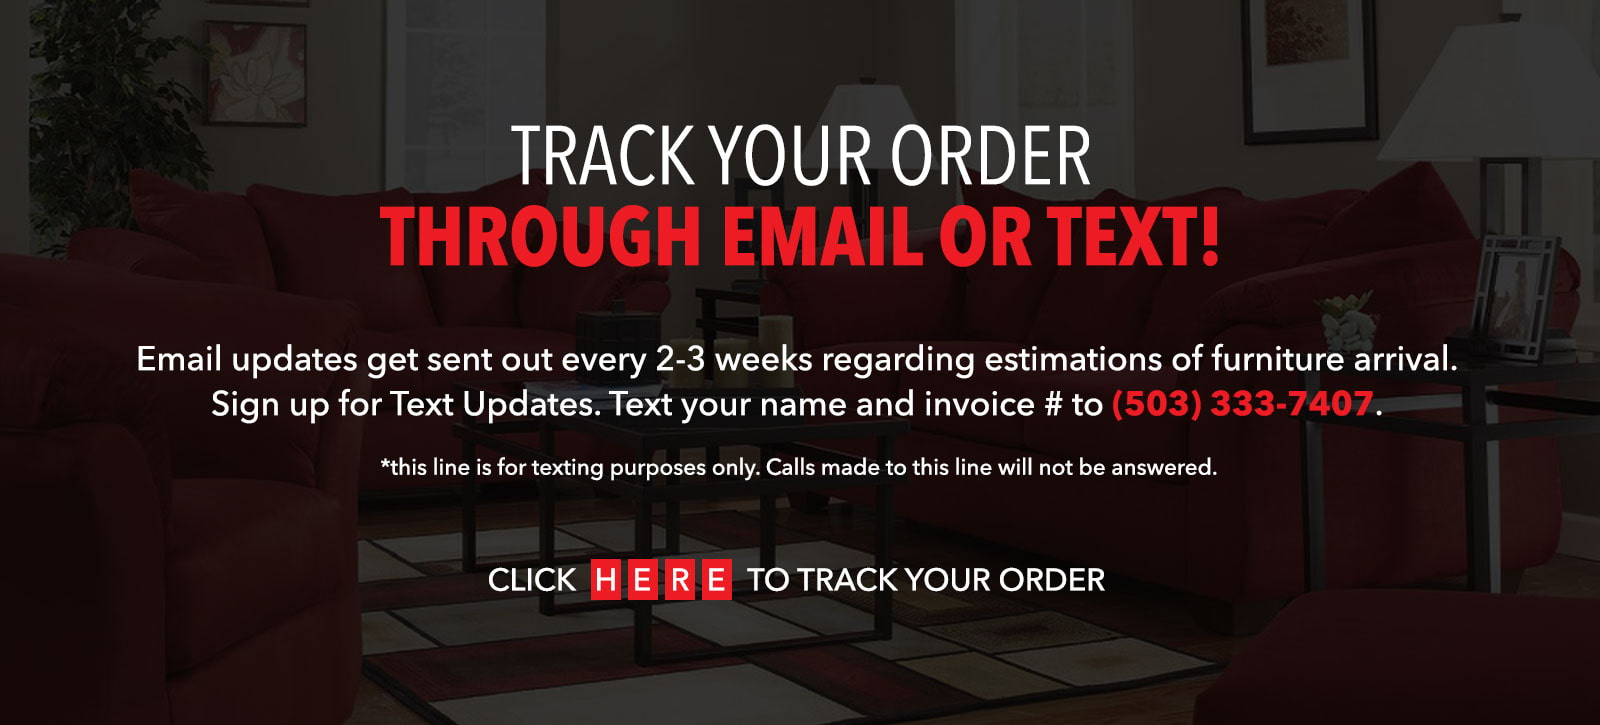 Track Your Order through Email or Text!